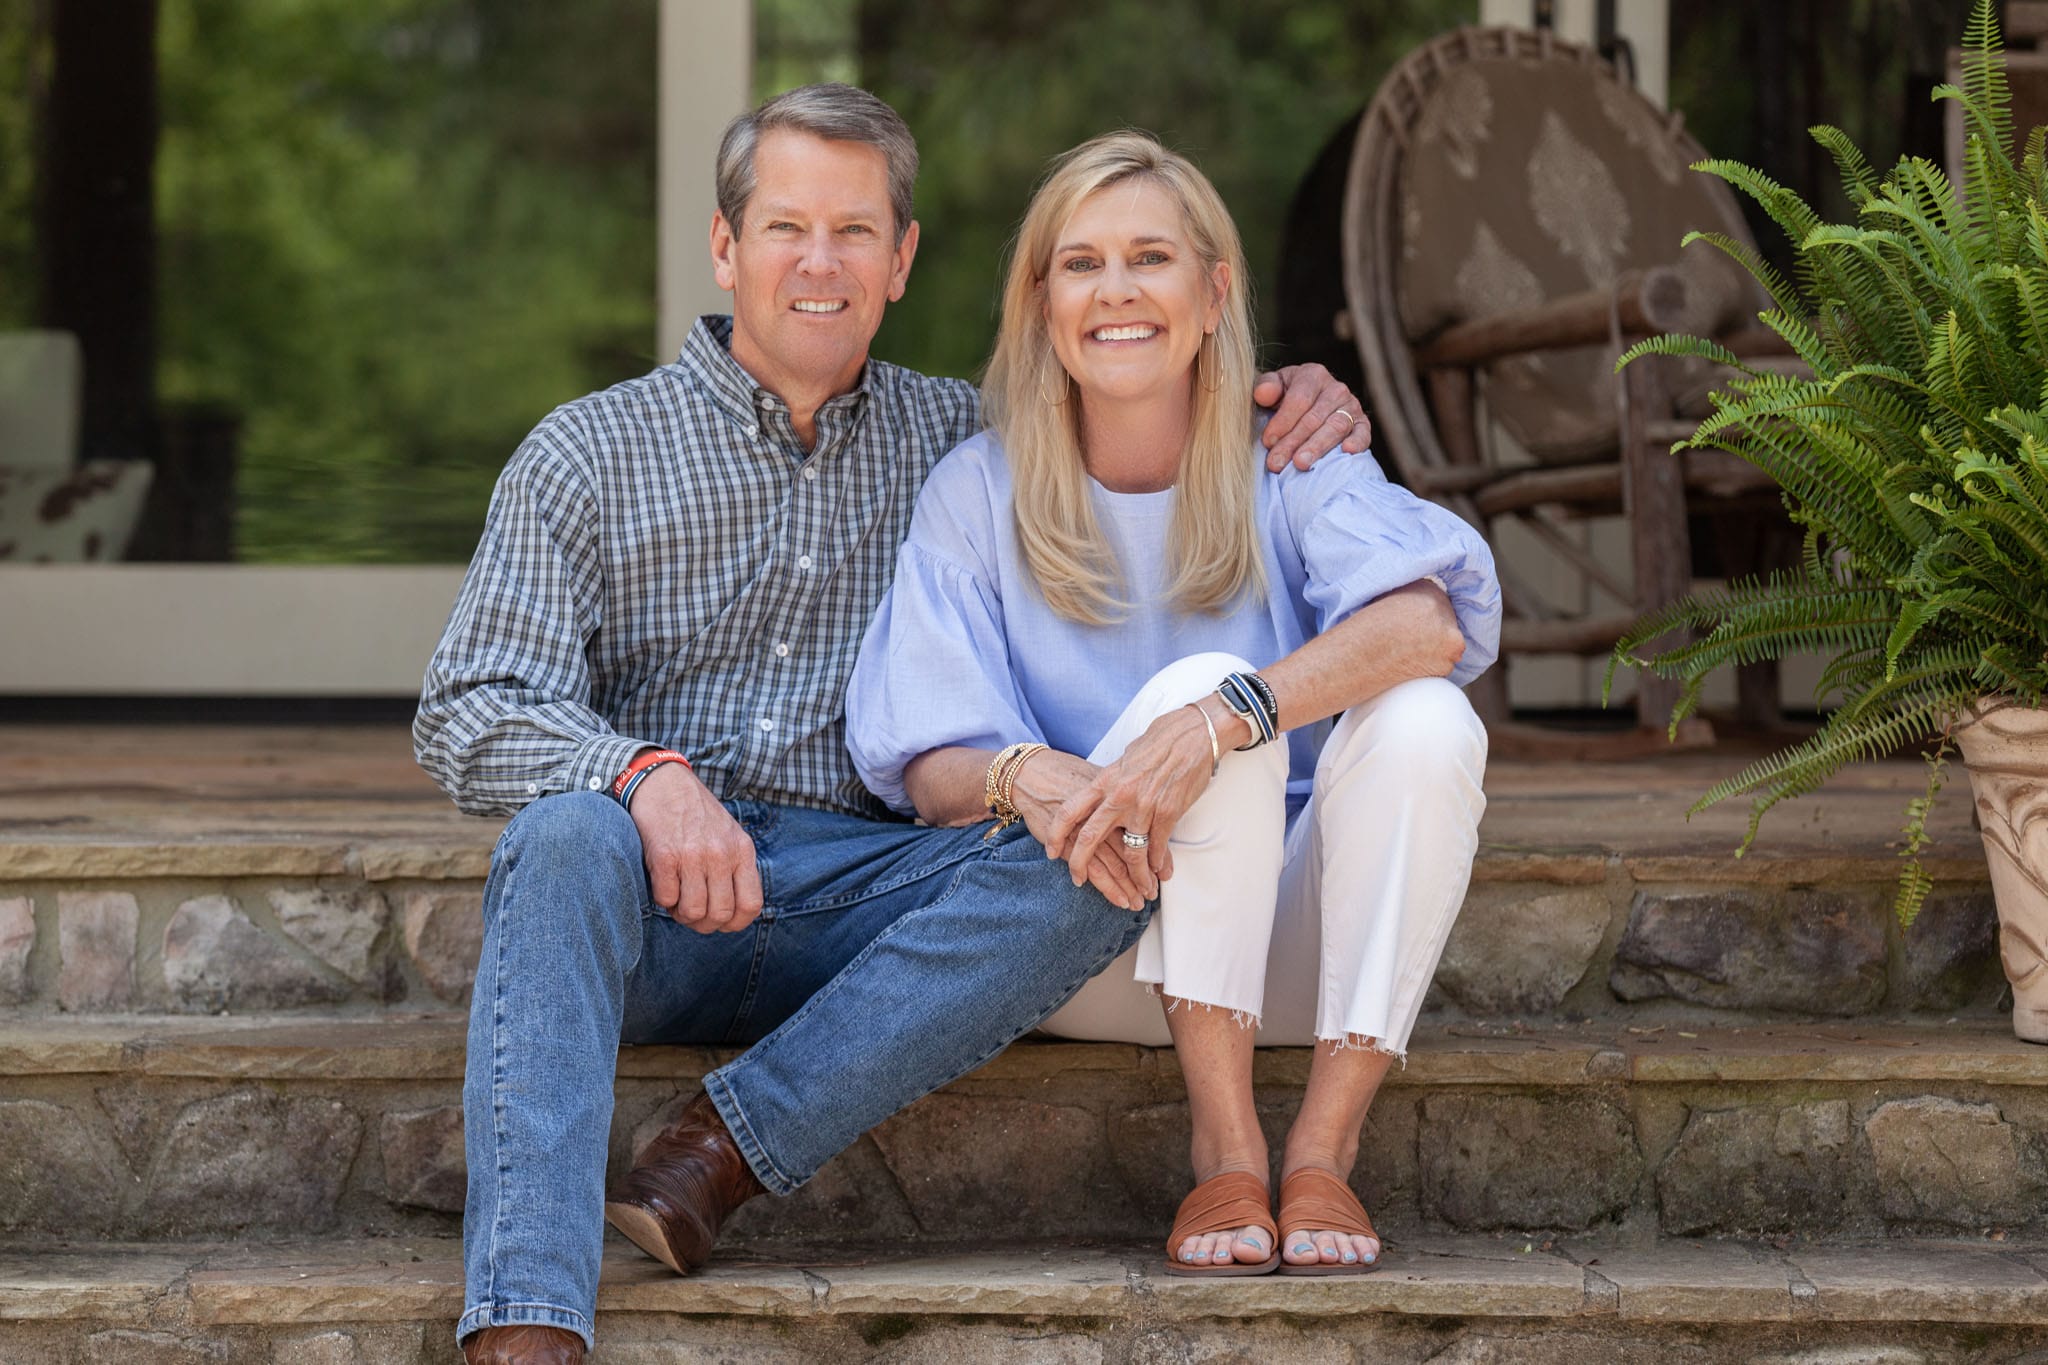 Georgia-Governor-Brian-Kemp-and-First-Lady-Marty-Kemp-sitting-sit-by-side-smiling-on-the-steps-of-their-home-in-Athens-Georgia.